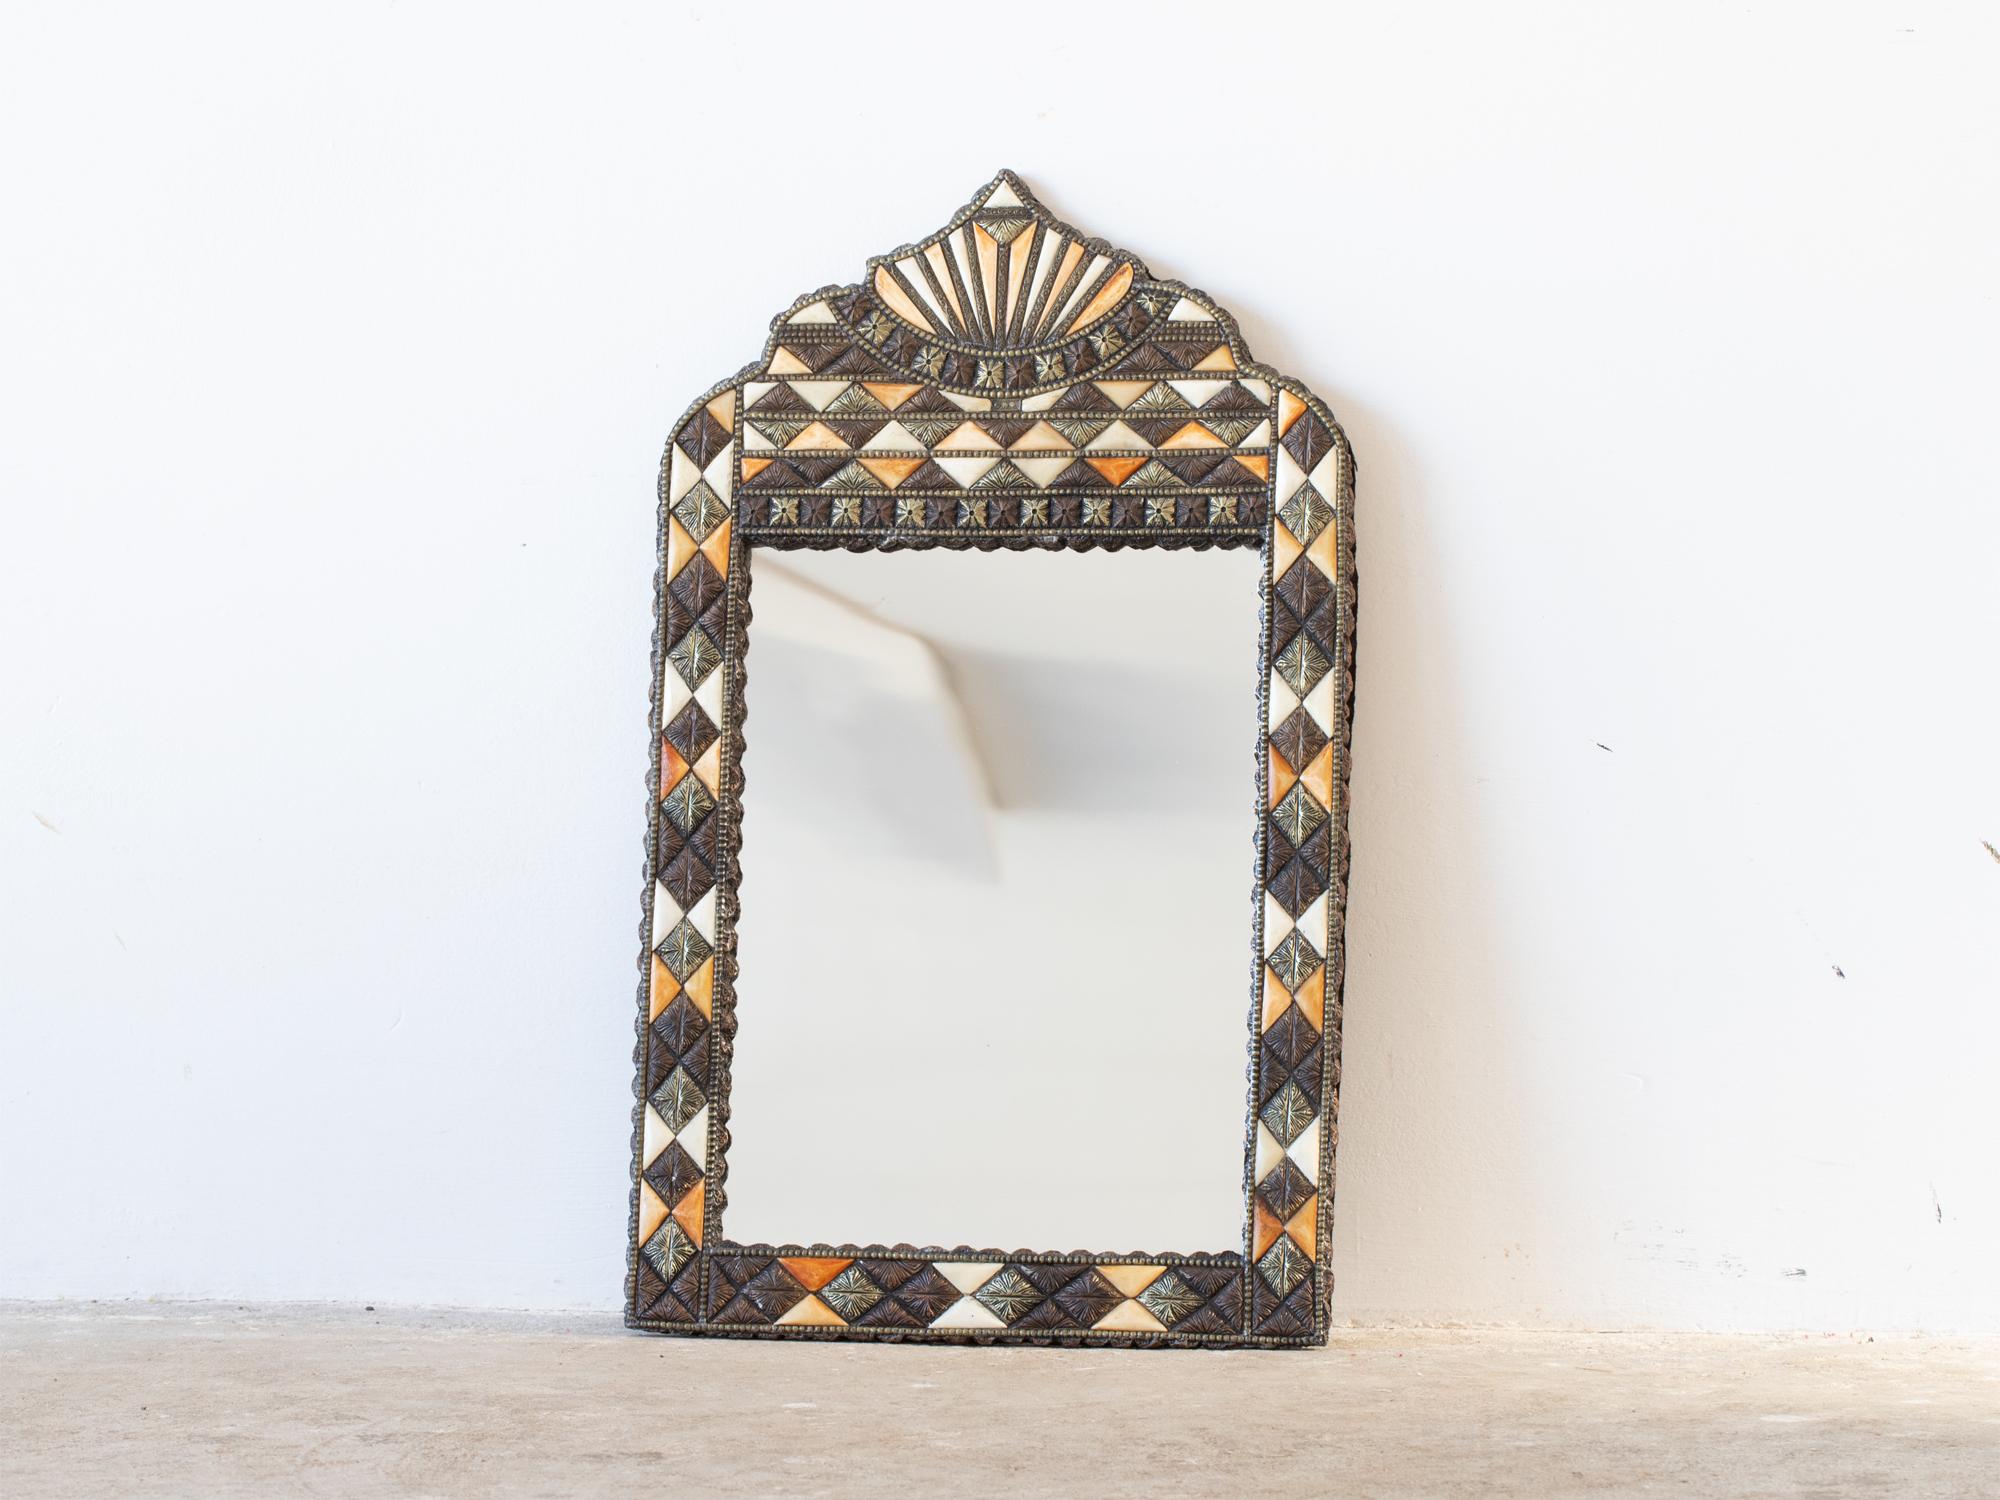 An arched Moroccan mirror with bone, brass and copper inlay, c. 1950s.

In good order with no losses, original glass.

67.5 x 41 cm

26.6 x 16.1 